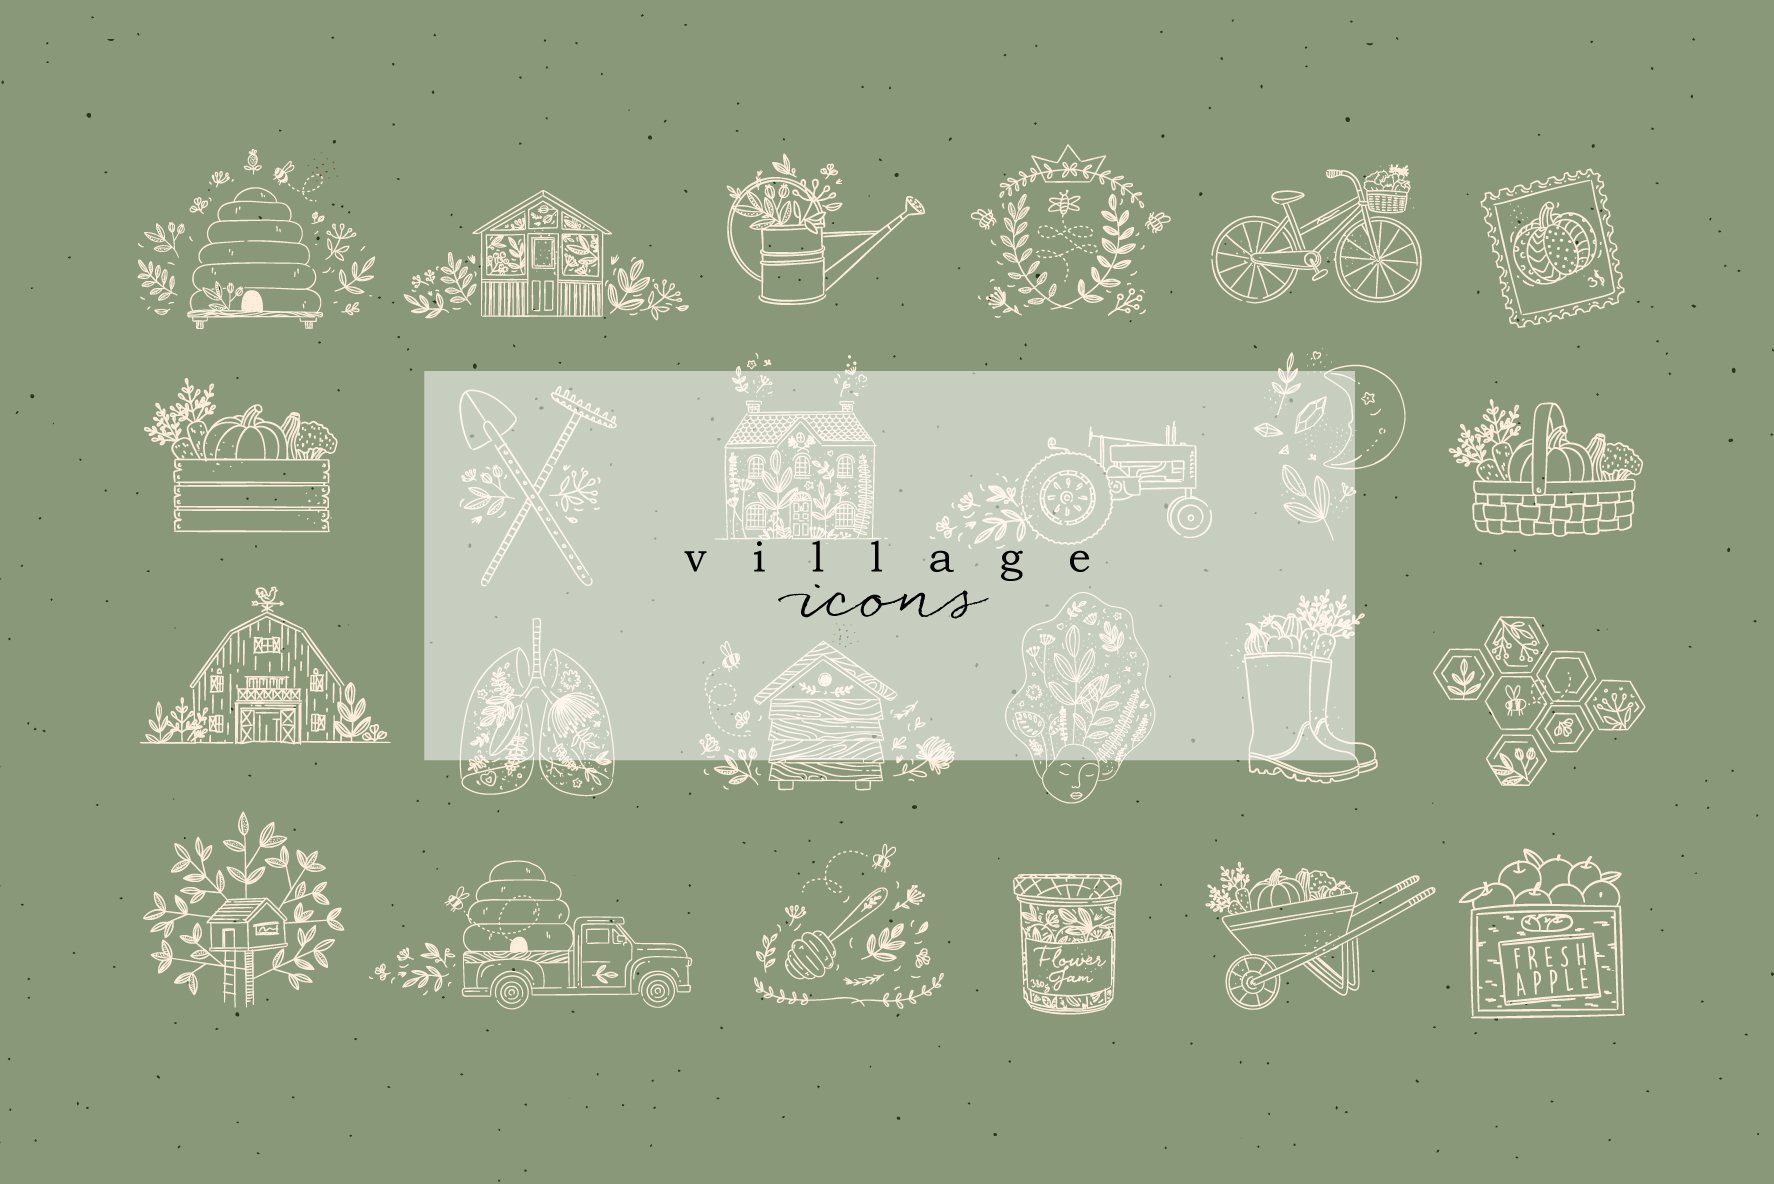 Village Graphic Icons cover image.